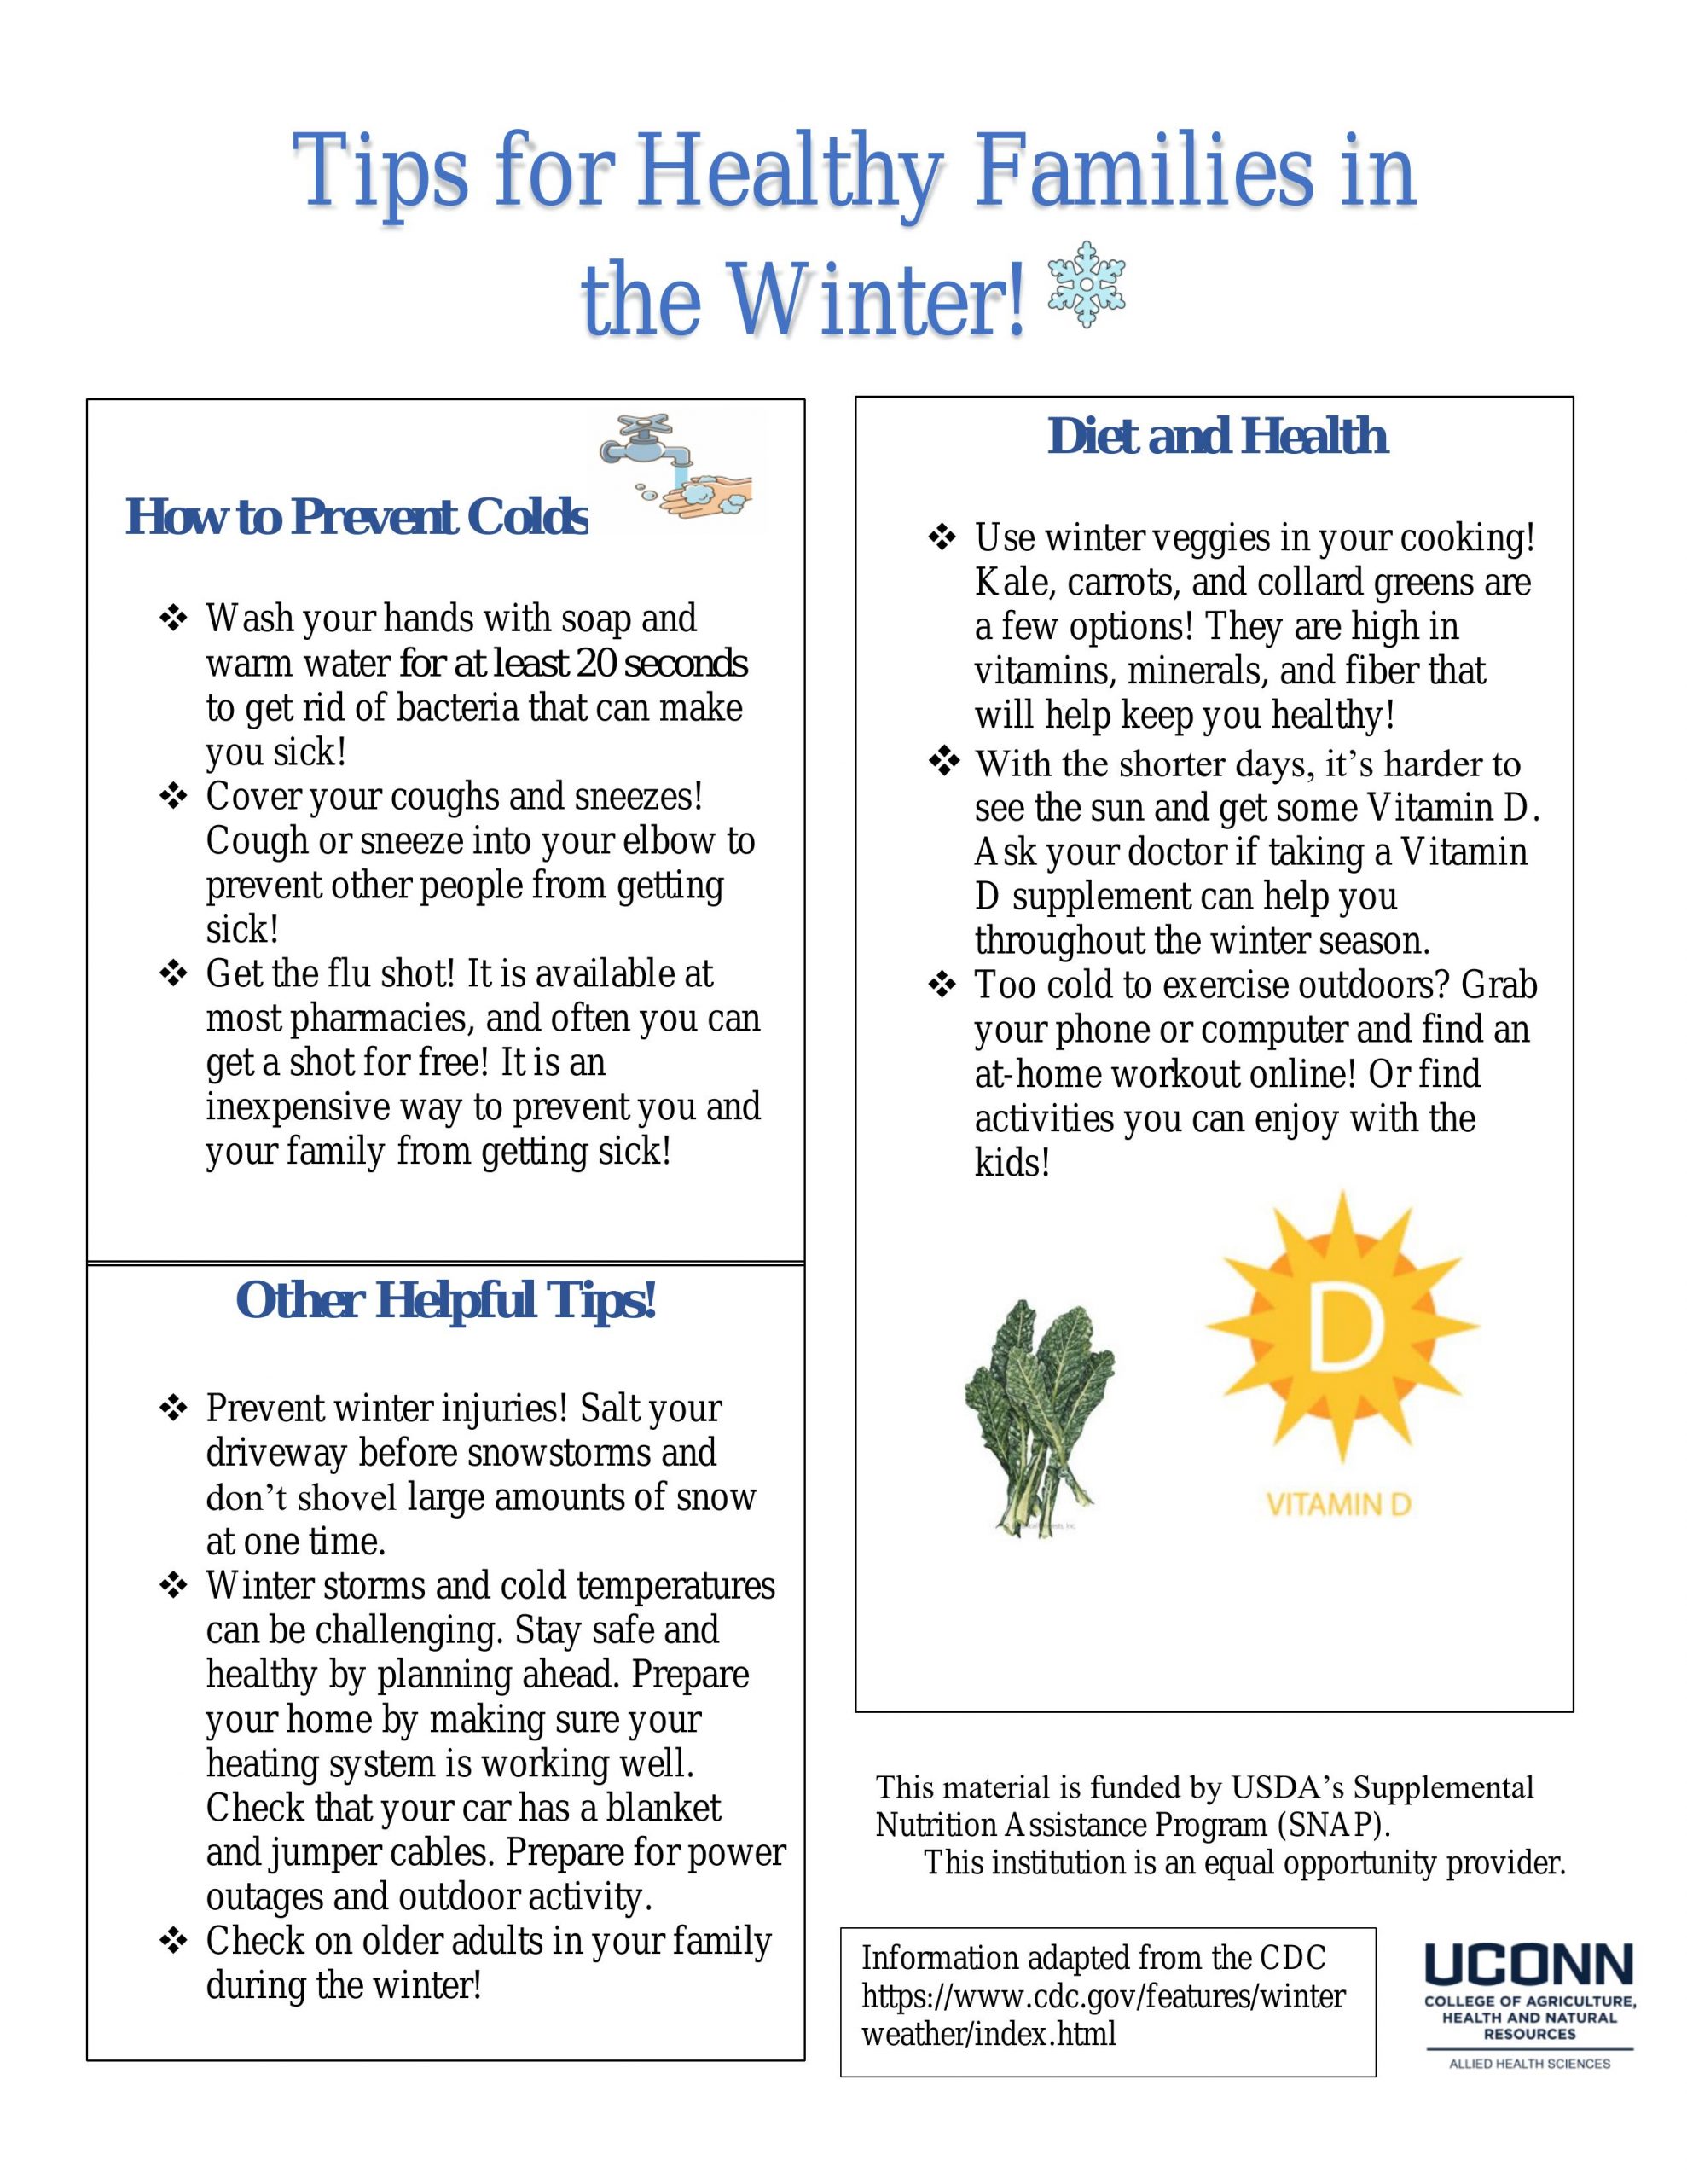 Healthy Families in the Winter handout